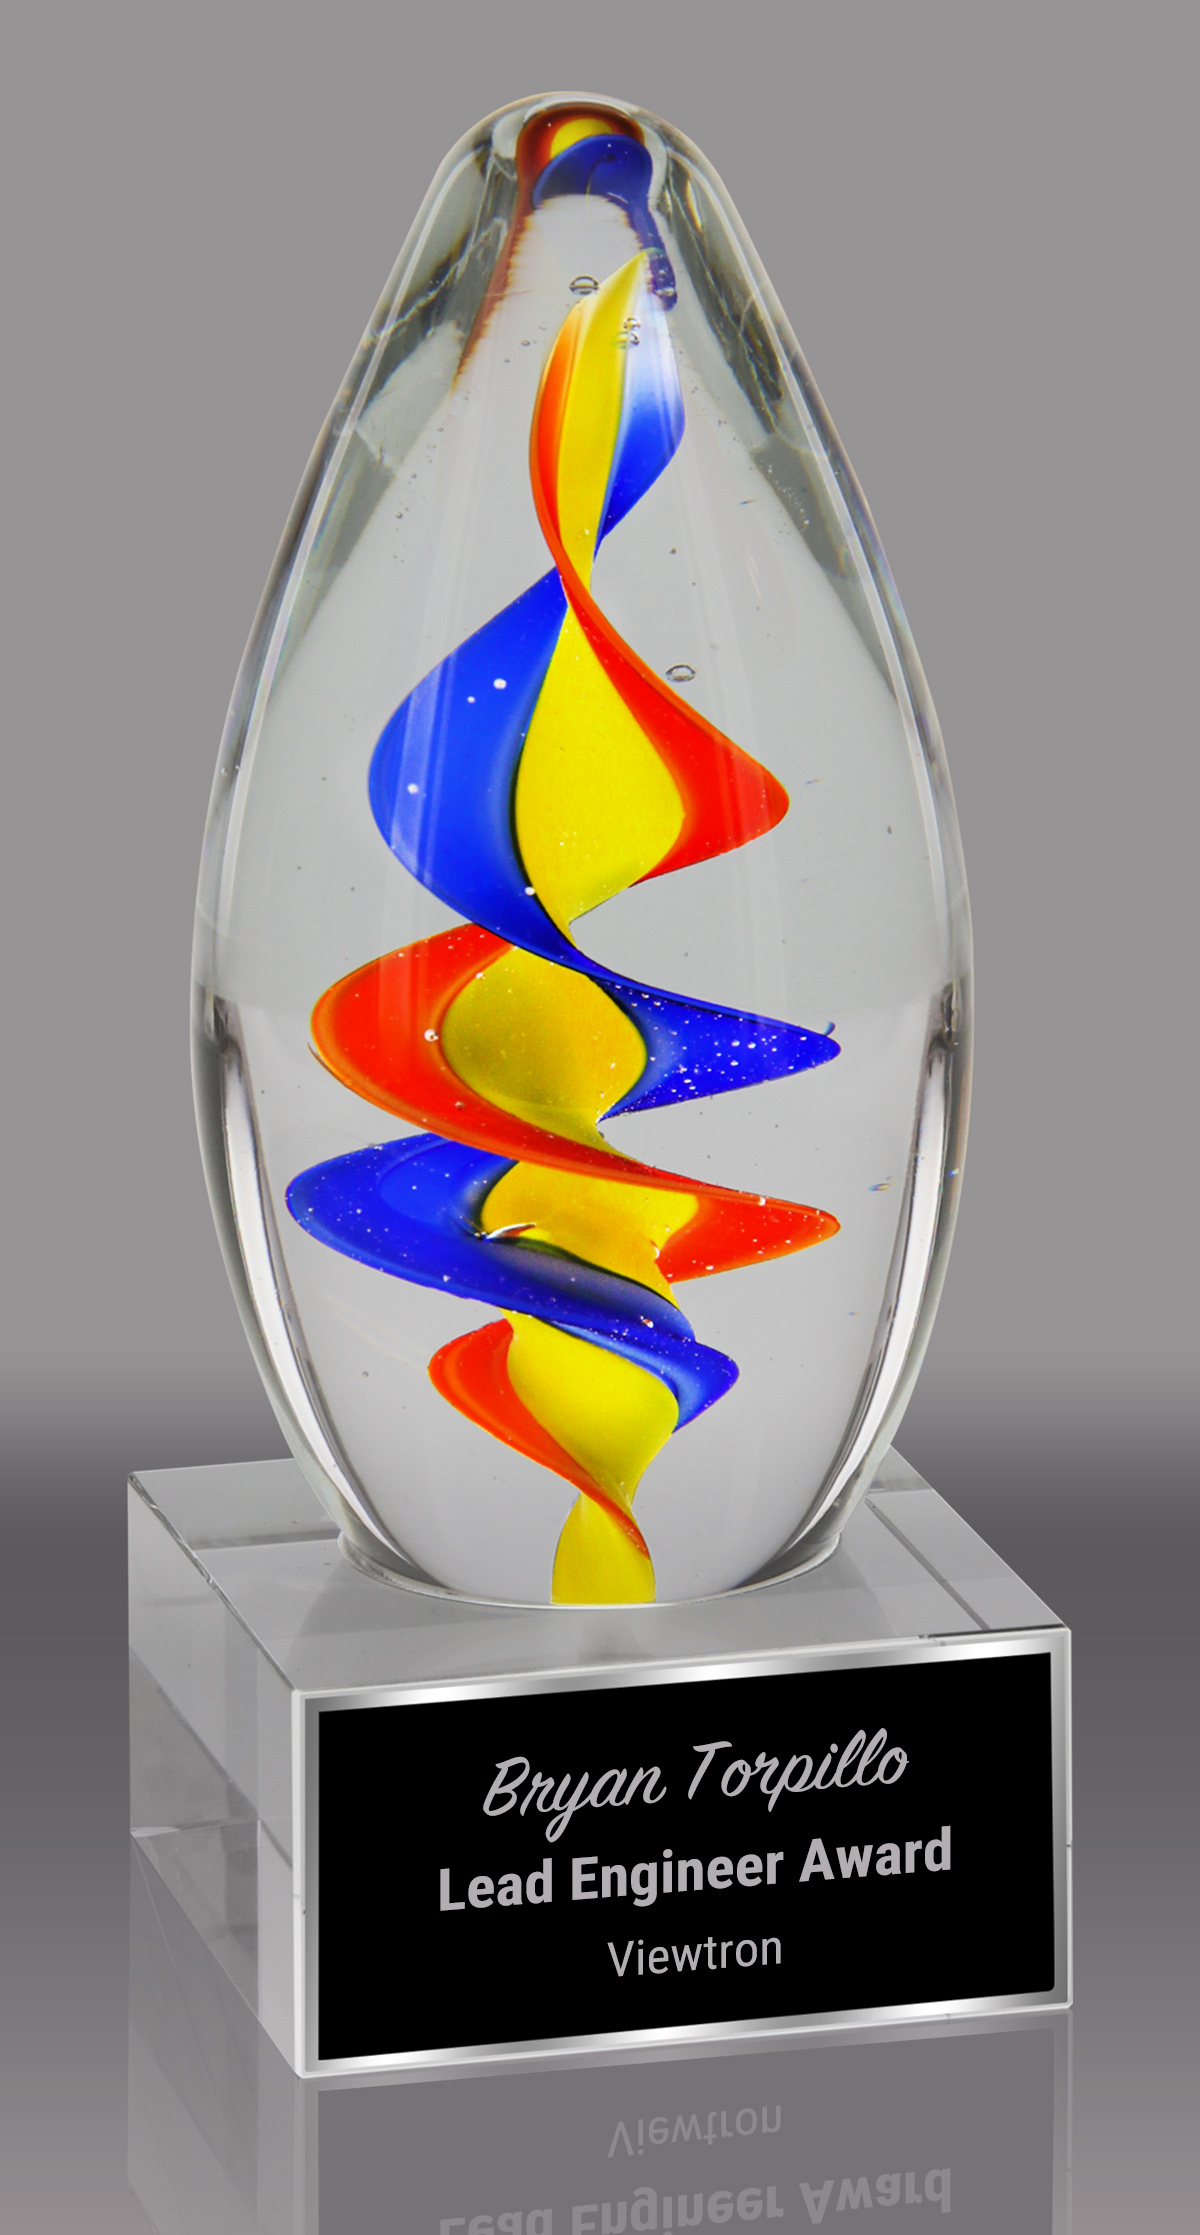 Colorful Egg-Shaped Art Glass Award with Clear Base